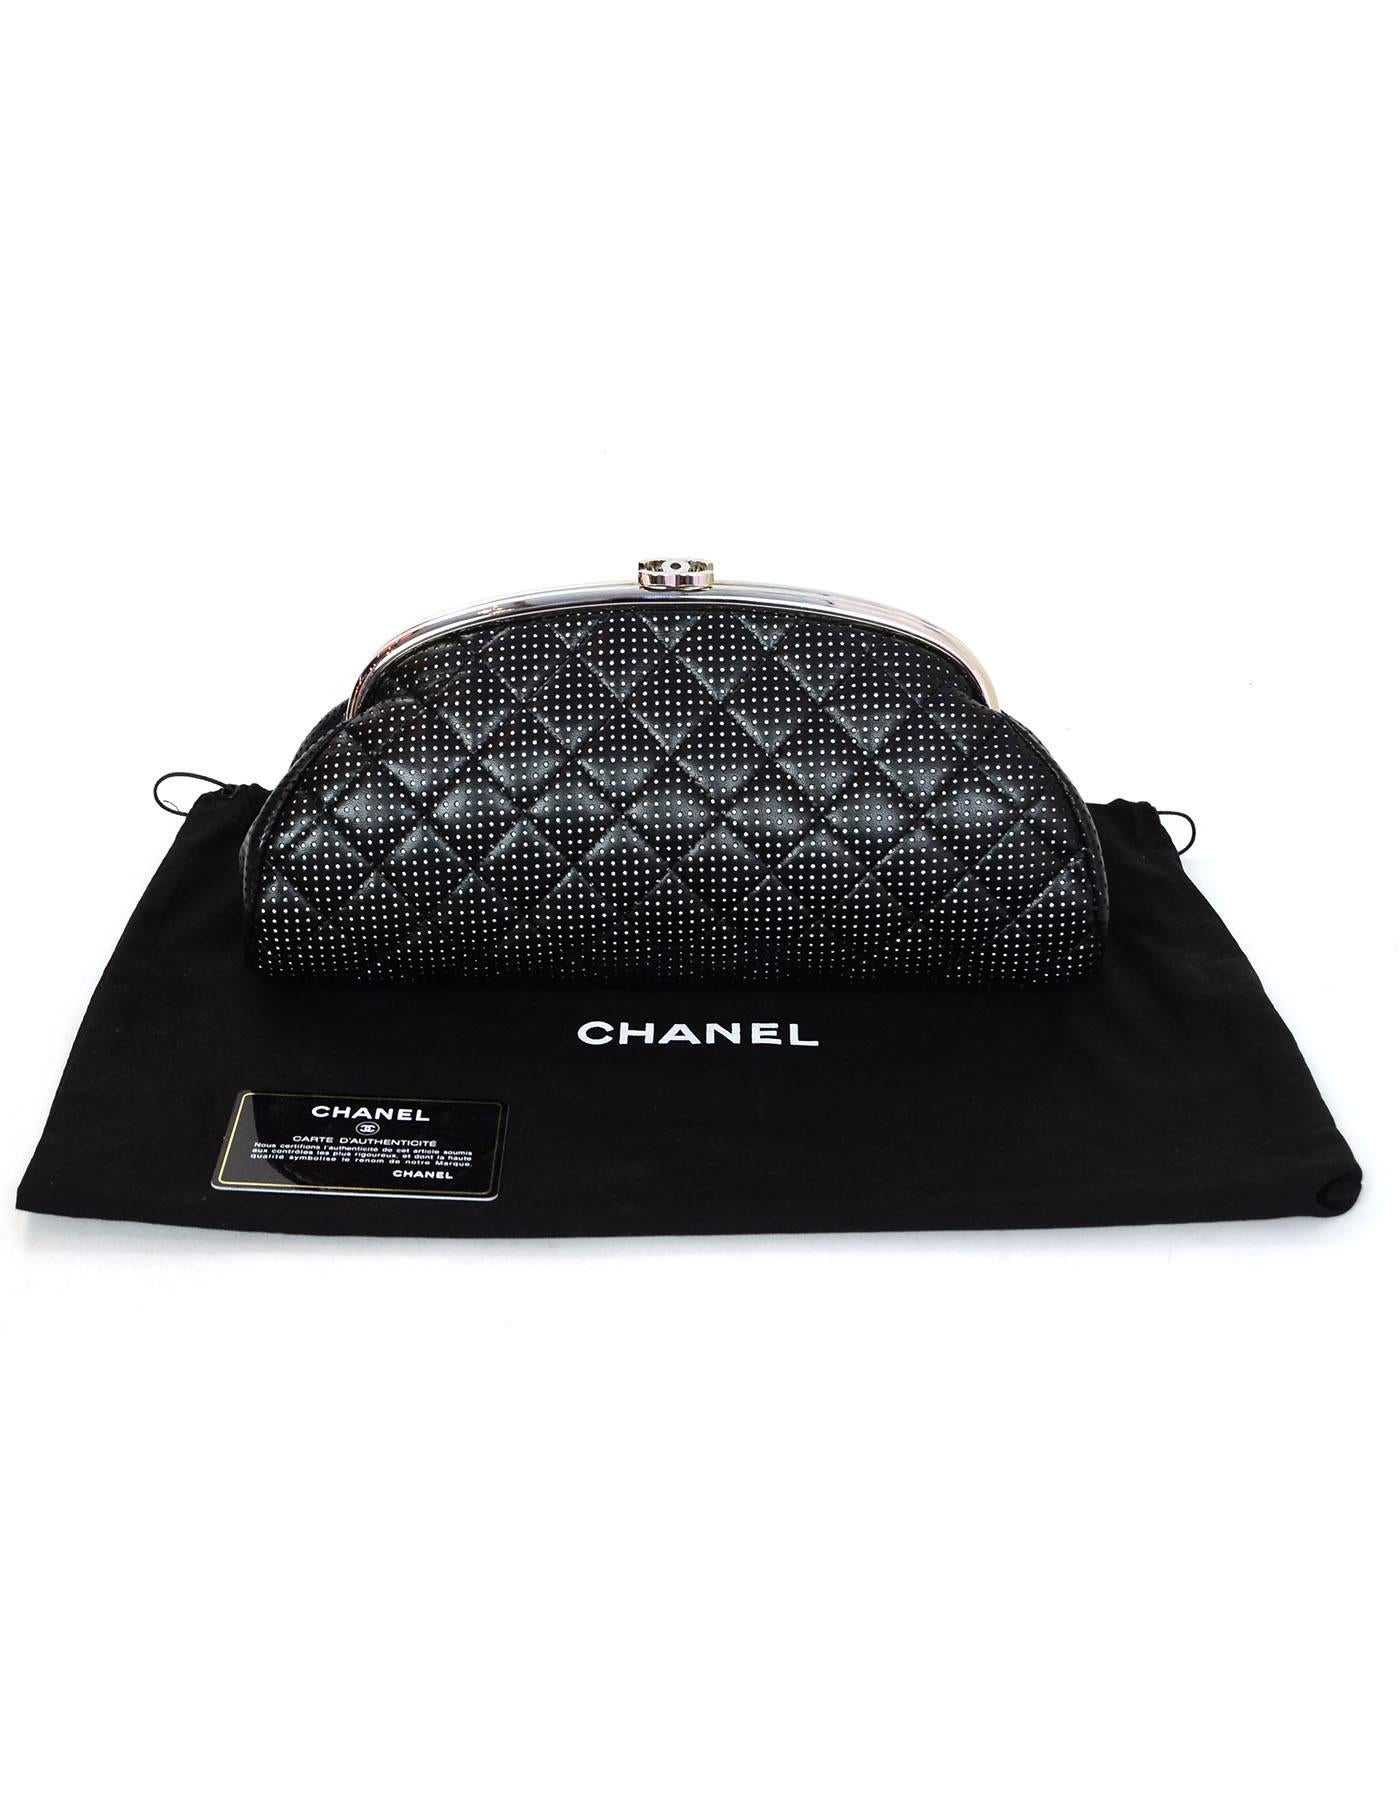 Chanel Black & White Quilted Perforated Leather Timeless Clutch Bag 2